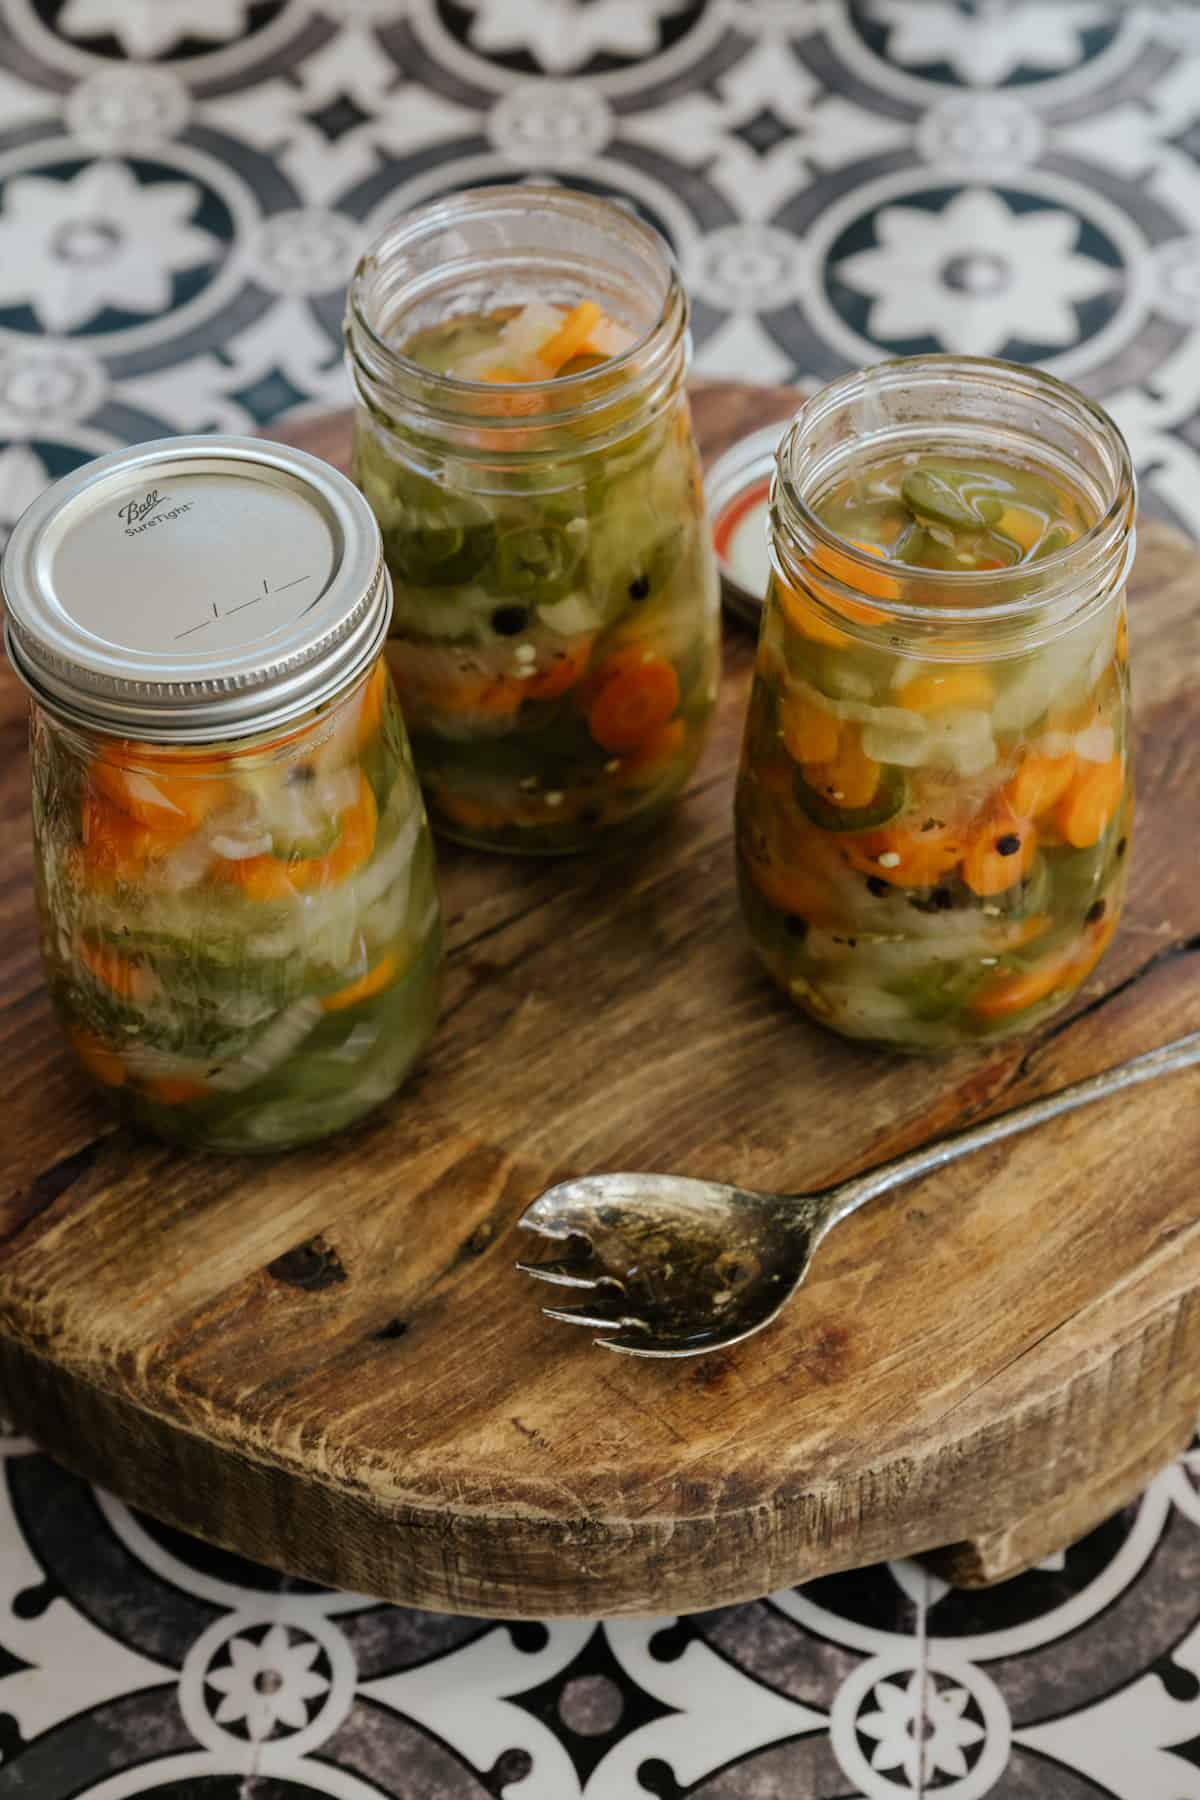 45 degree angle of jars of Mexican escabeche lined up on a wooden surface.